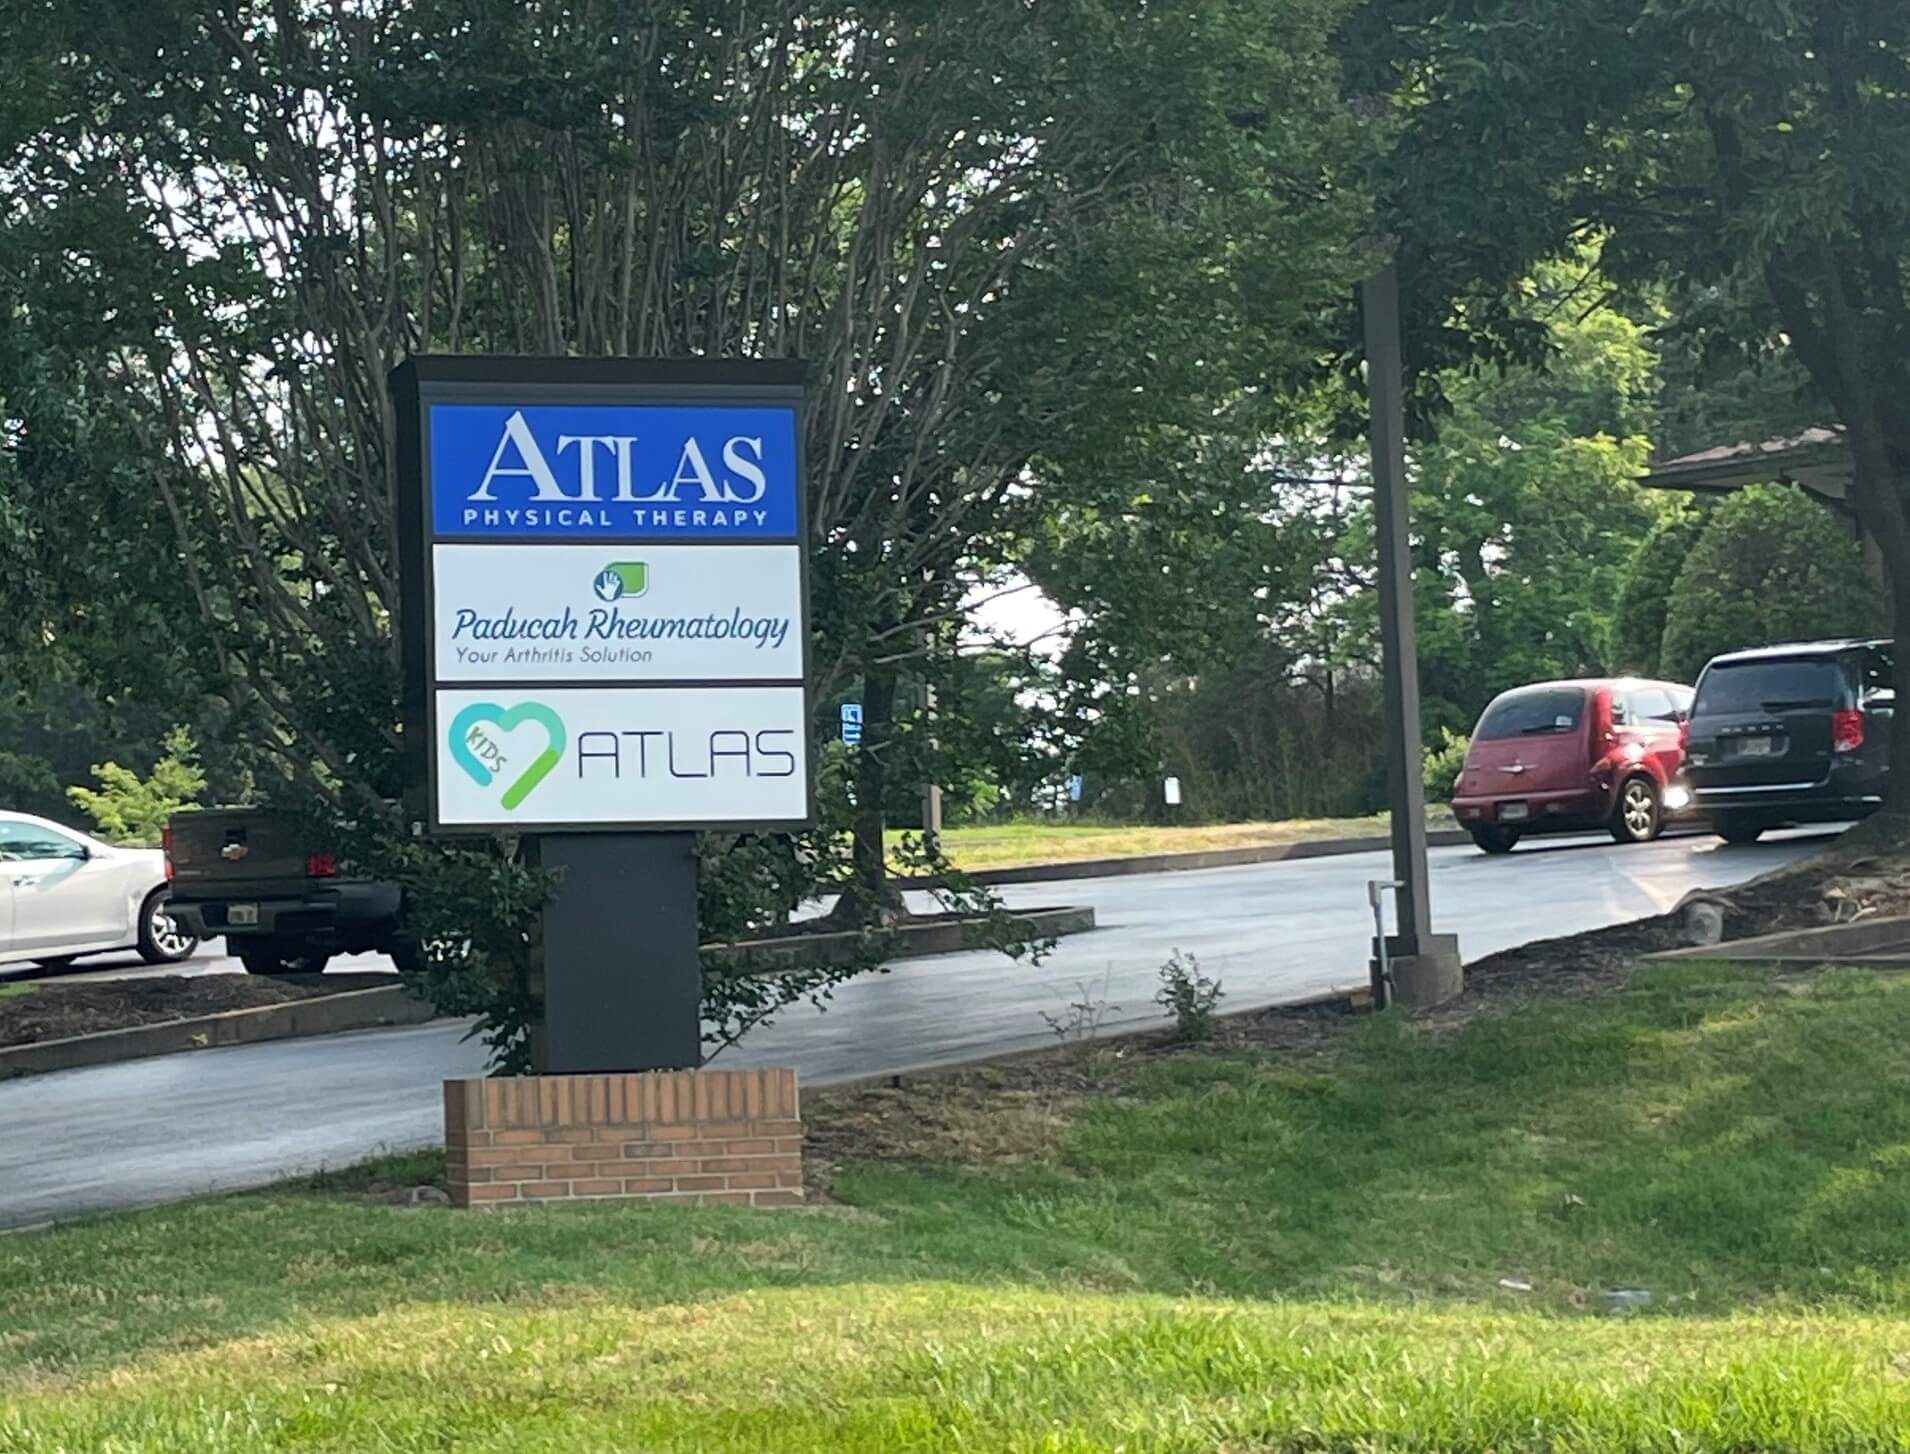 Atlas Physical Therapy location sign